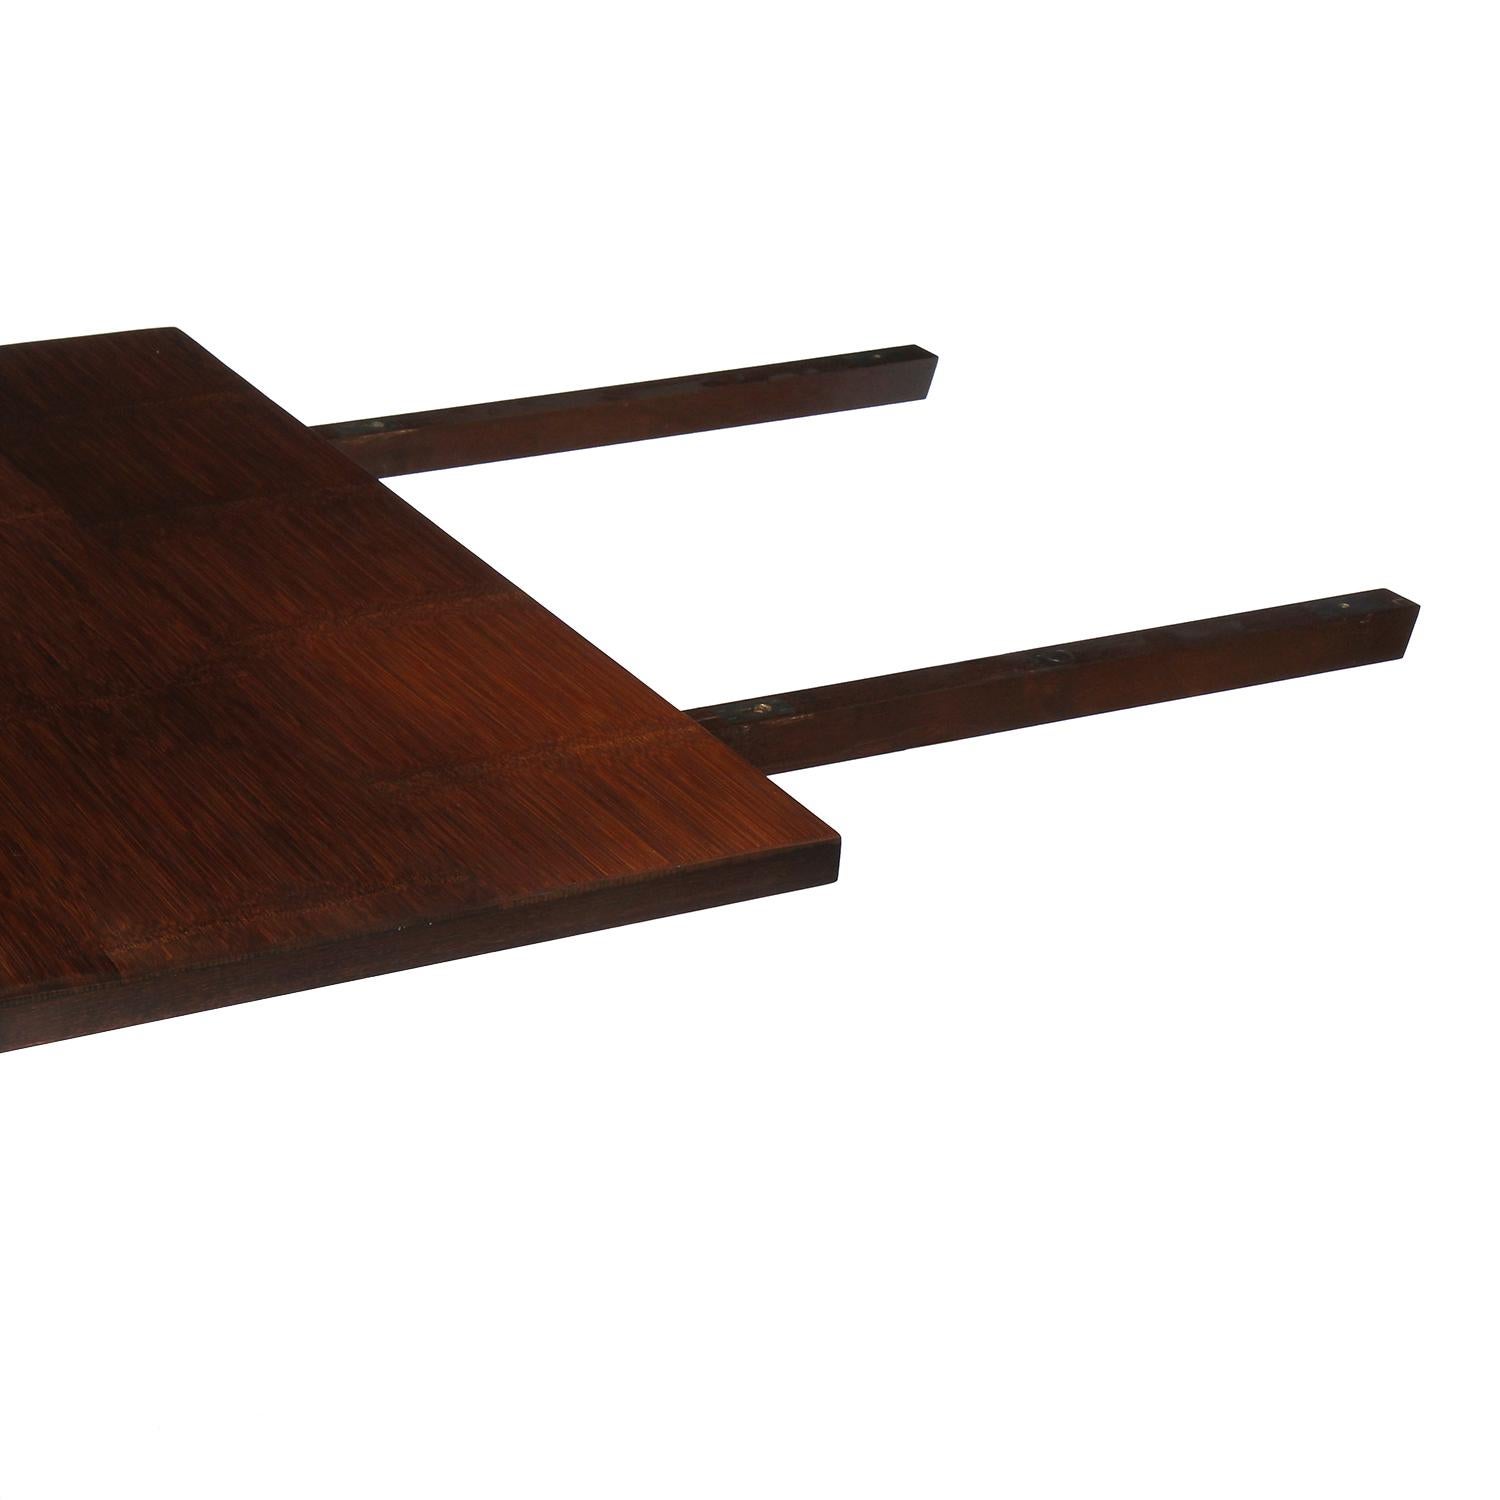 American Wyeth Original Split Bamboo Dining / Conference Table with End Leaves